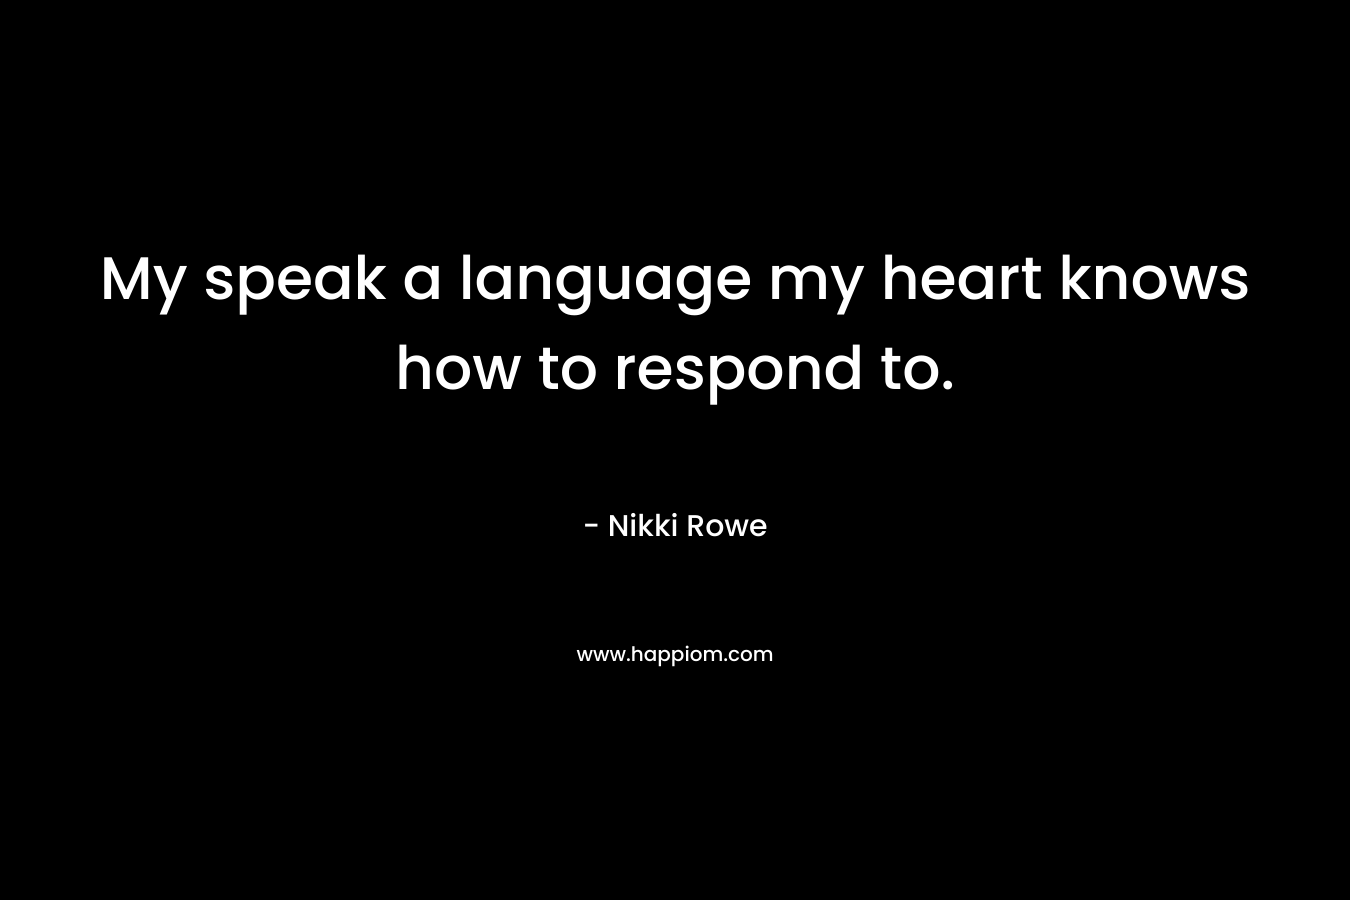 My speak a language my heart knows how to respond to.